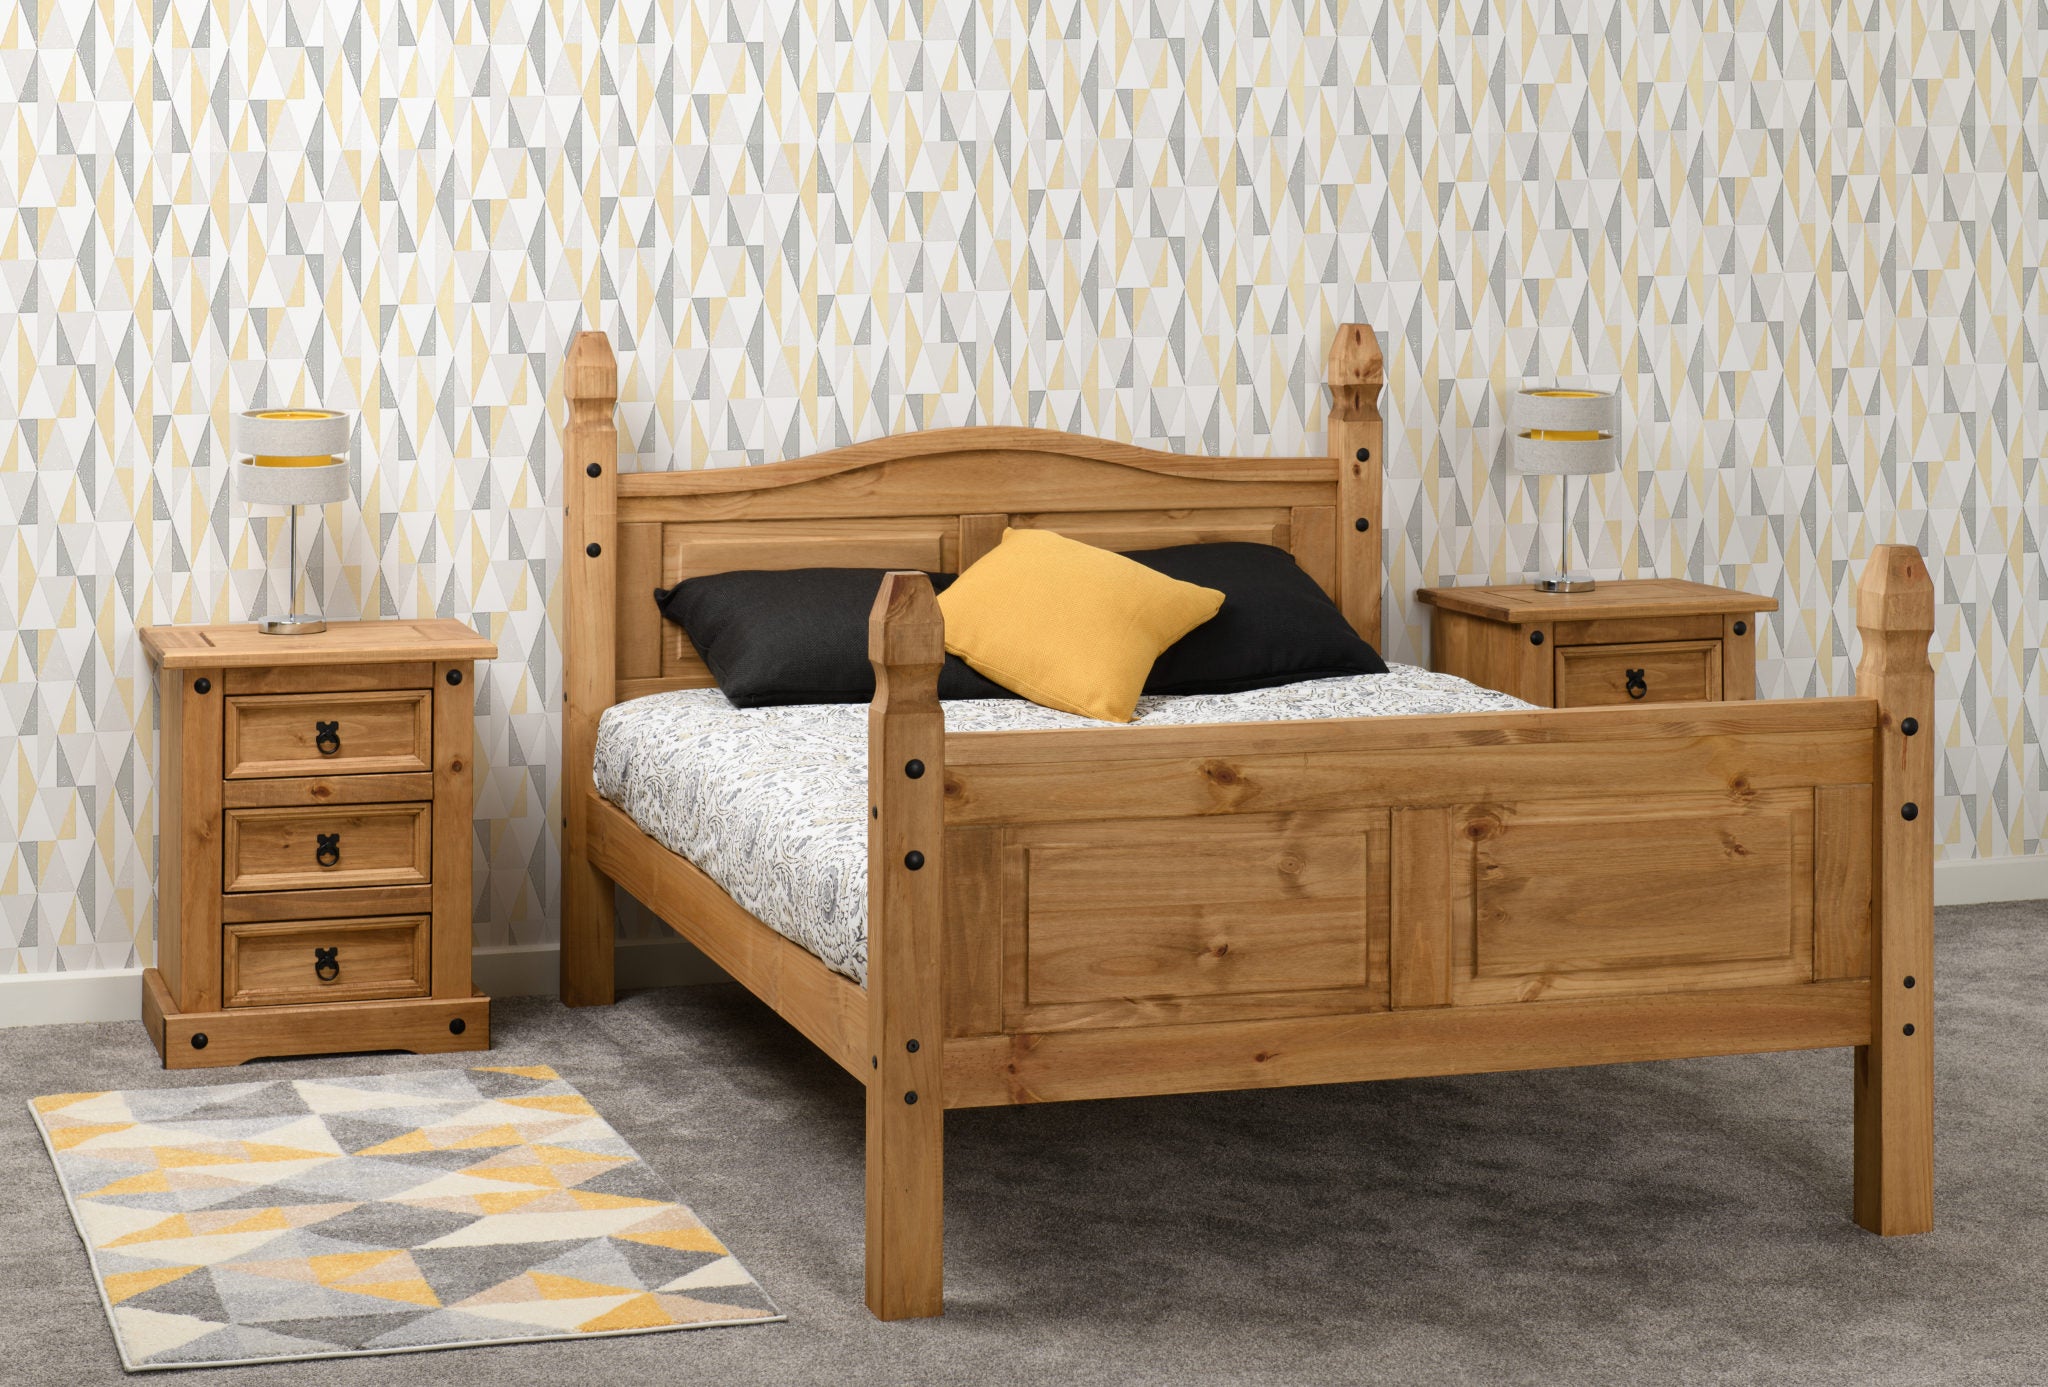 Corona 4'6" Double Bed High Foot End - Distressed Waxed Pine